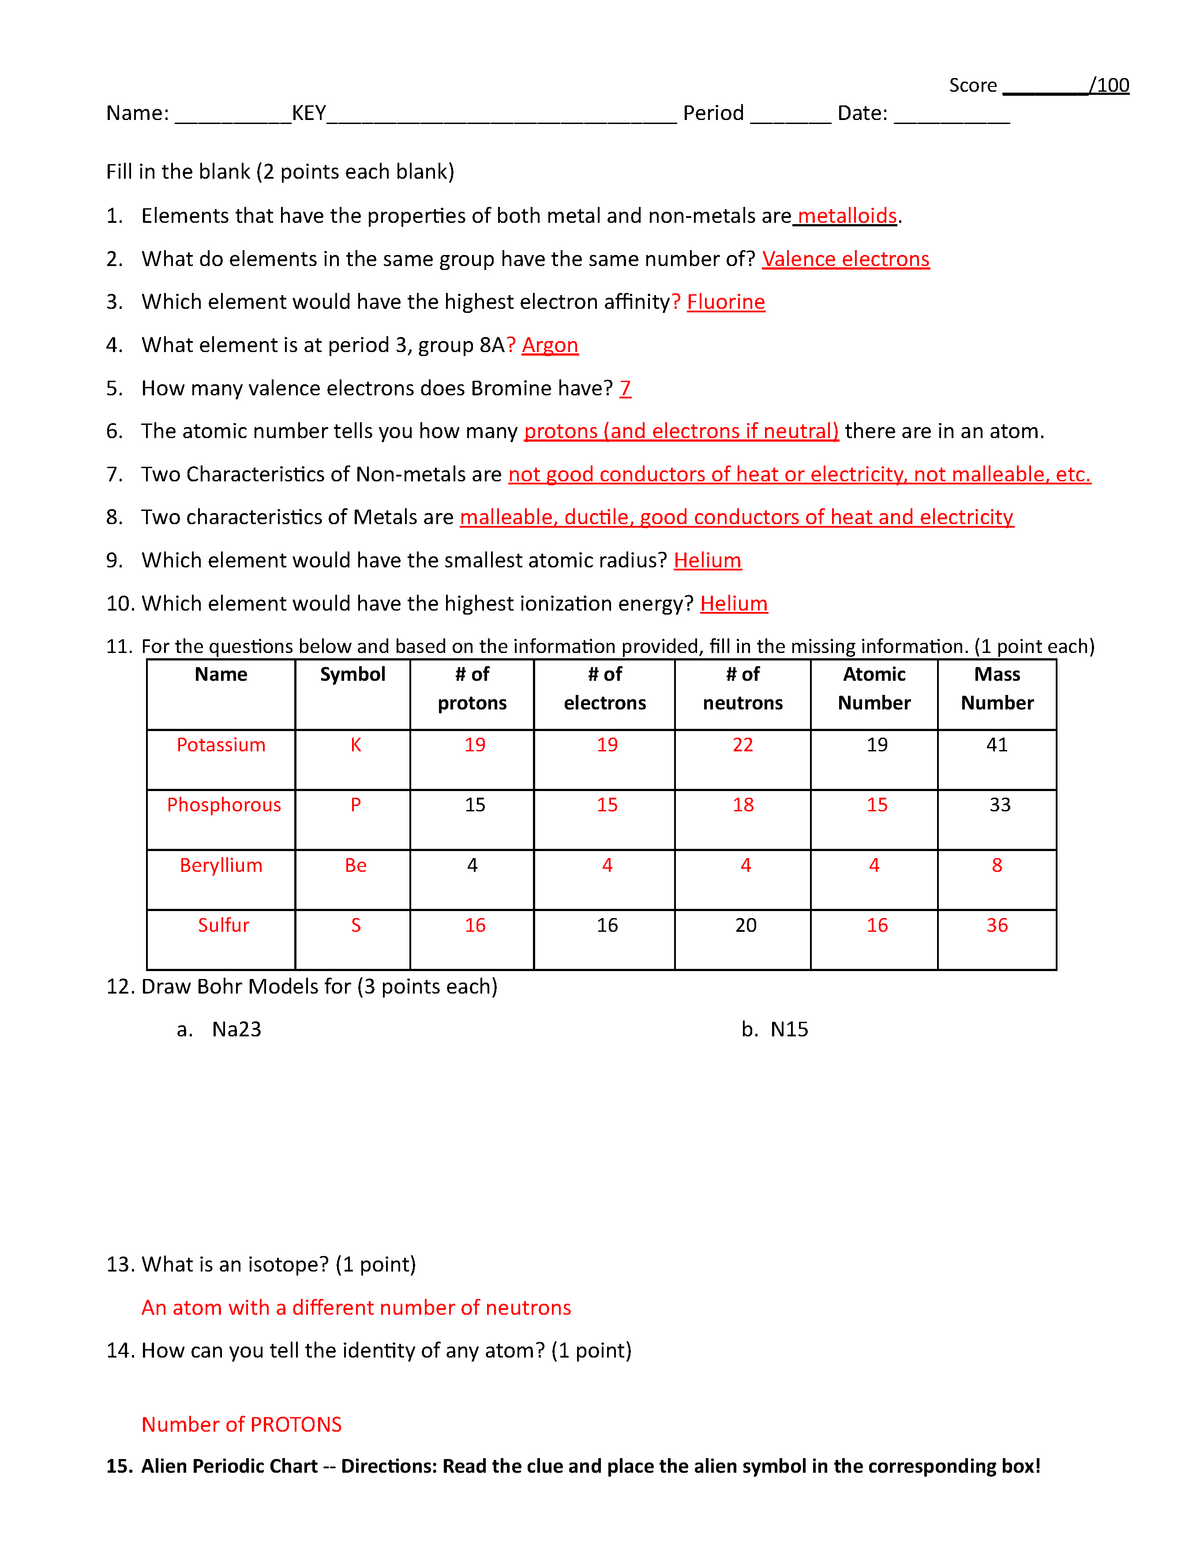 KEY periodic table test 22 - CHEM 022 - Chemistry - StuDocu Inside Periodic Table Review Worksheet